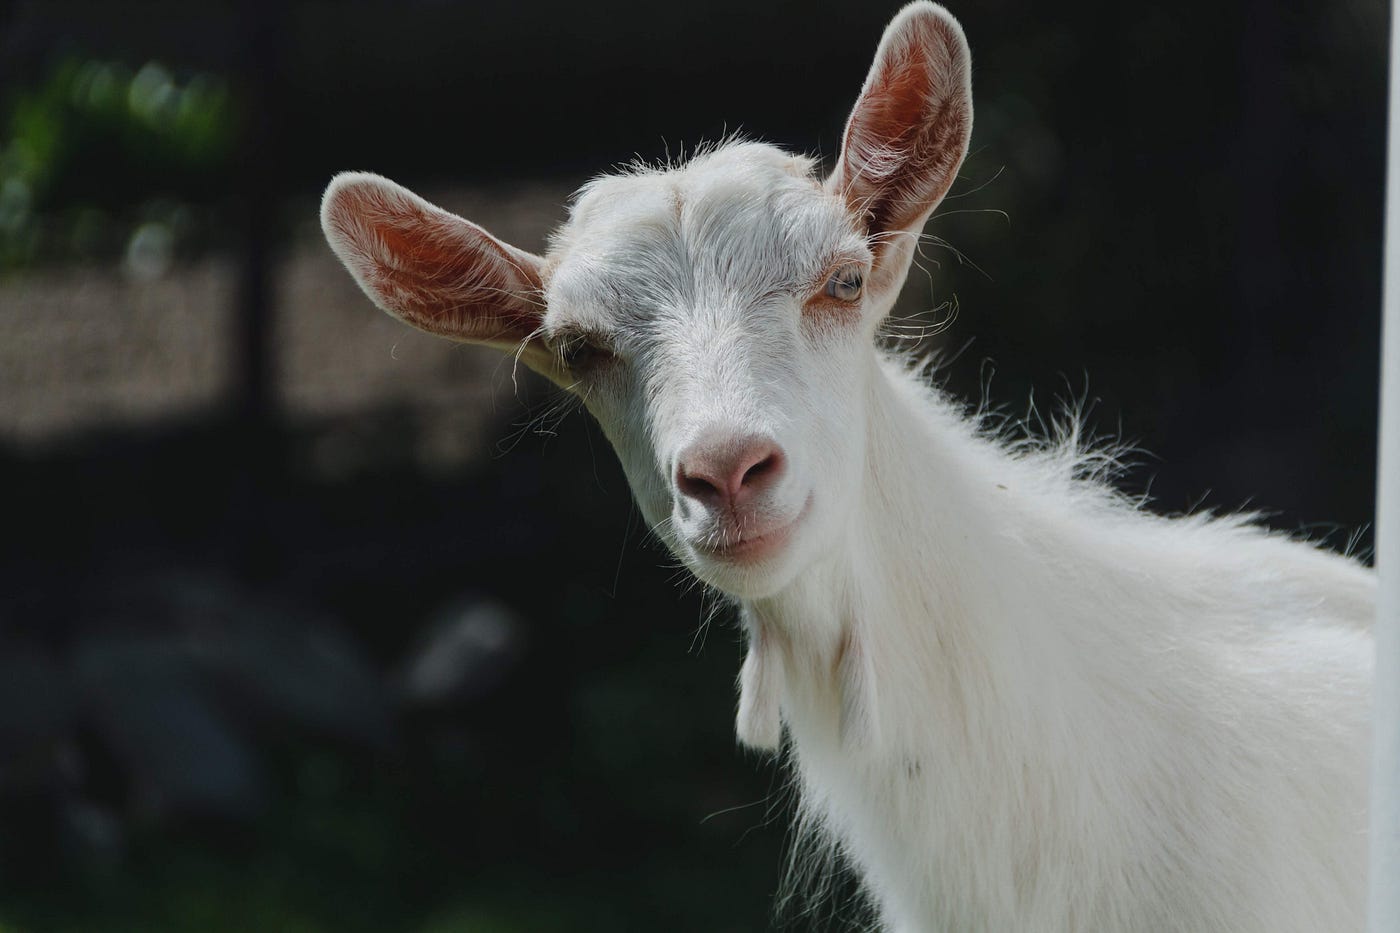 Blaming Others With a Goat: A 'Scapegoat